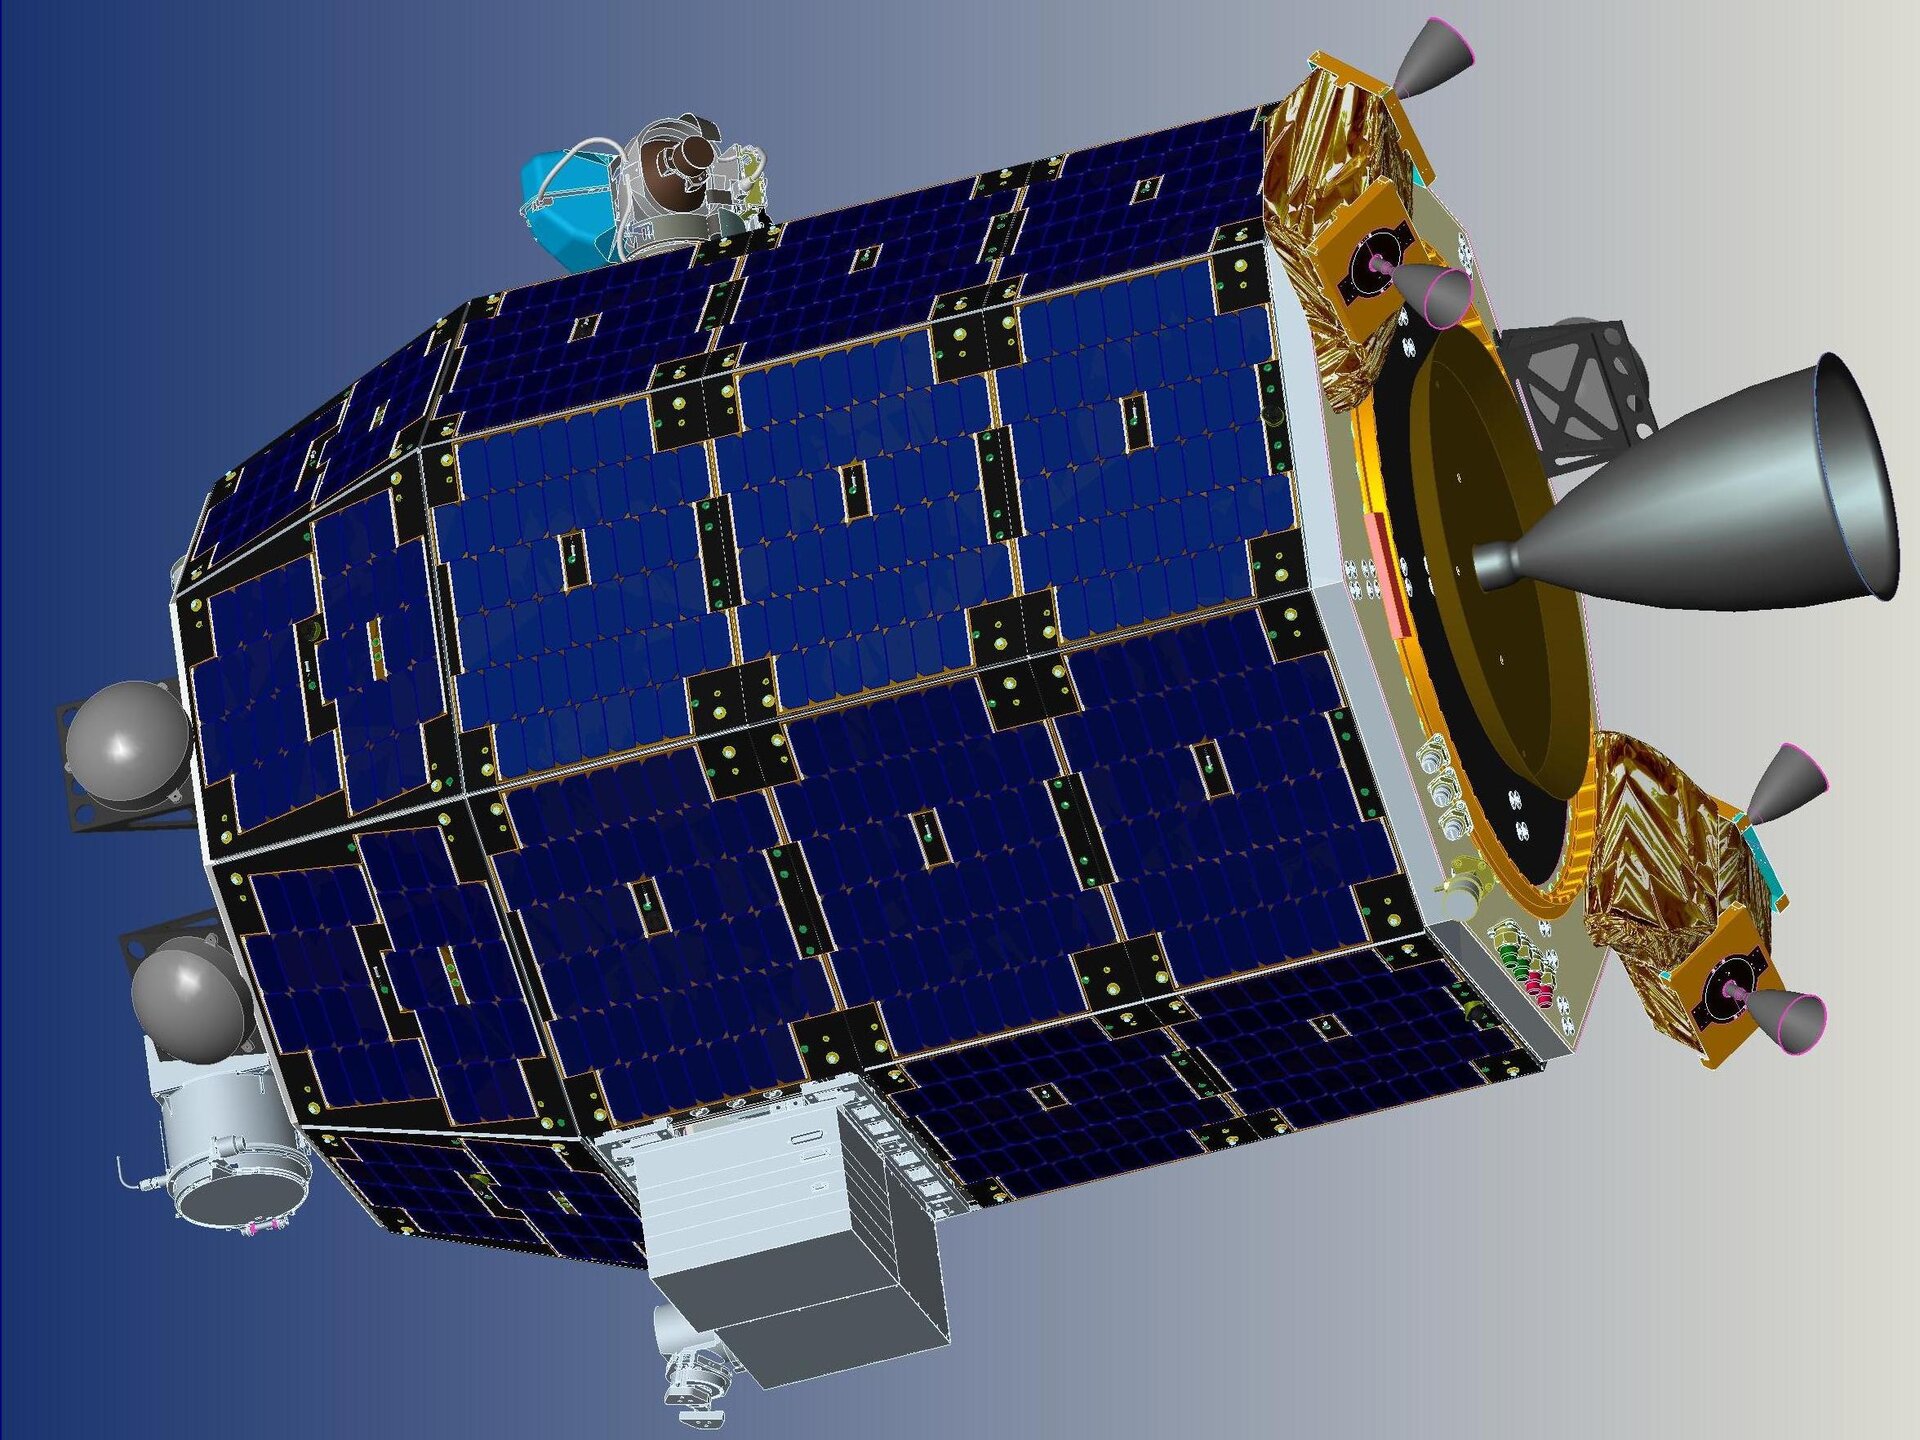 Computer-generated model of the LADEE spacecraft